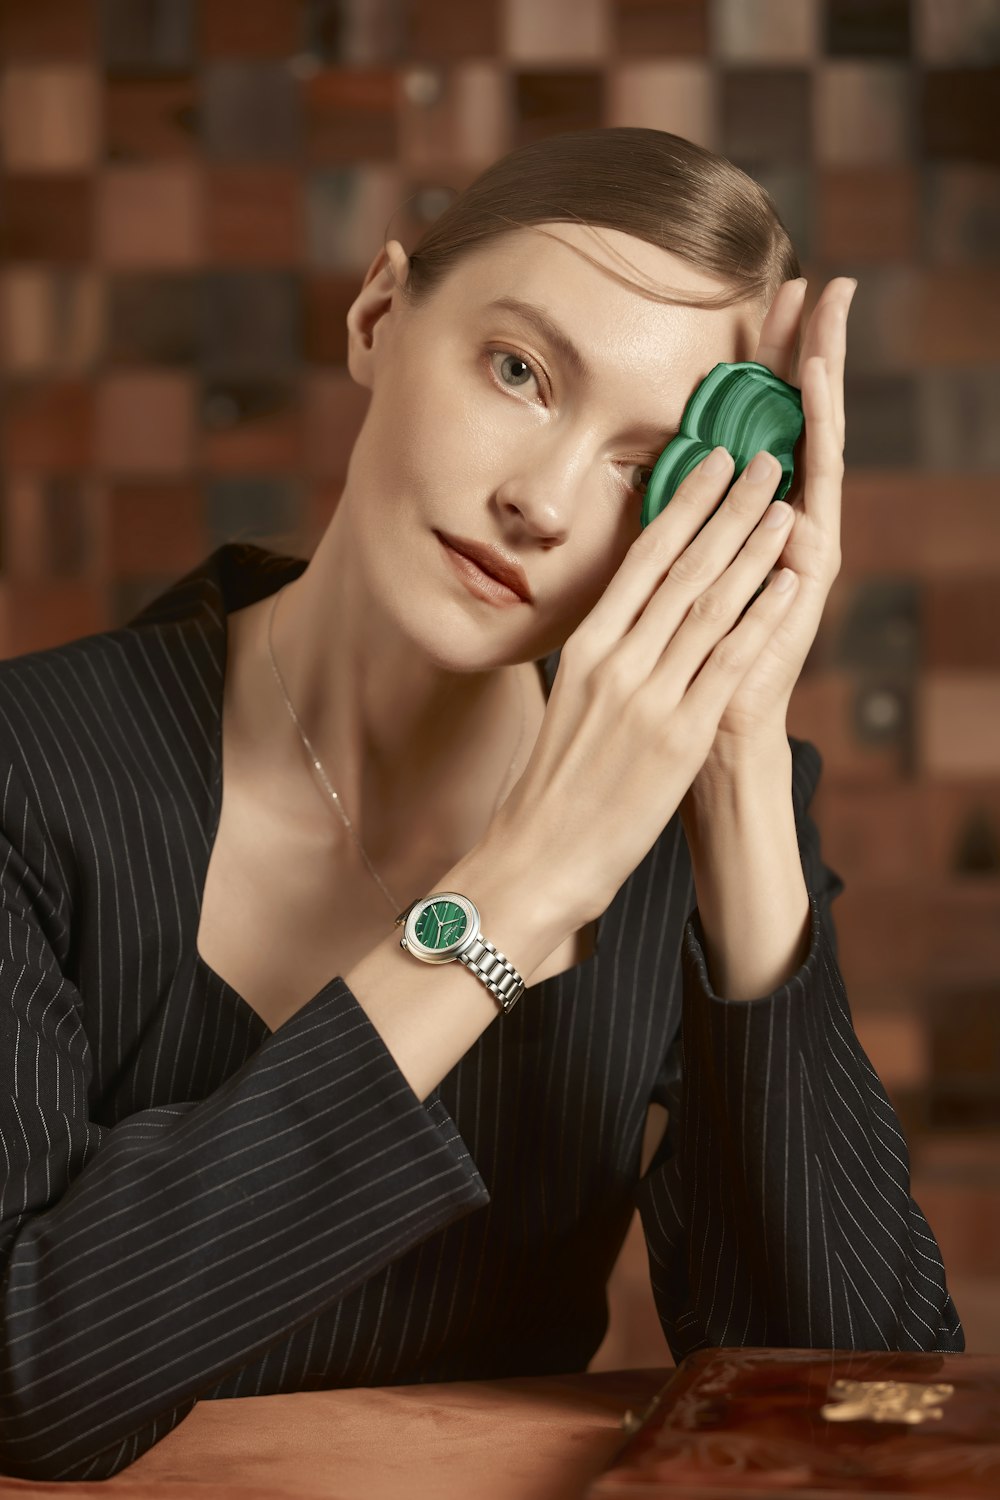 a woman sitting at a table holding a green object